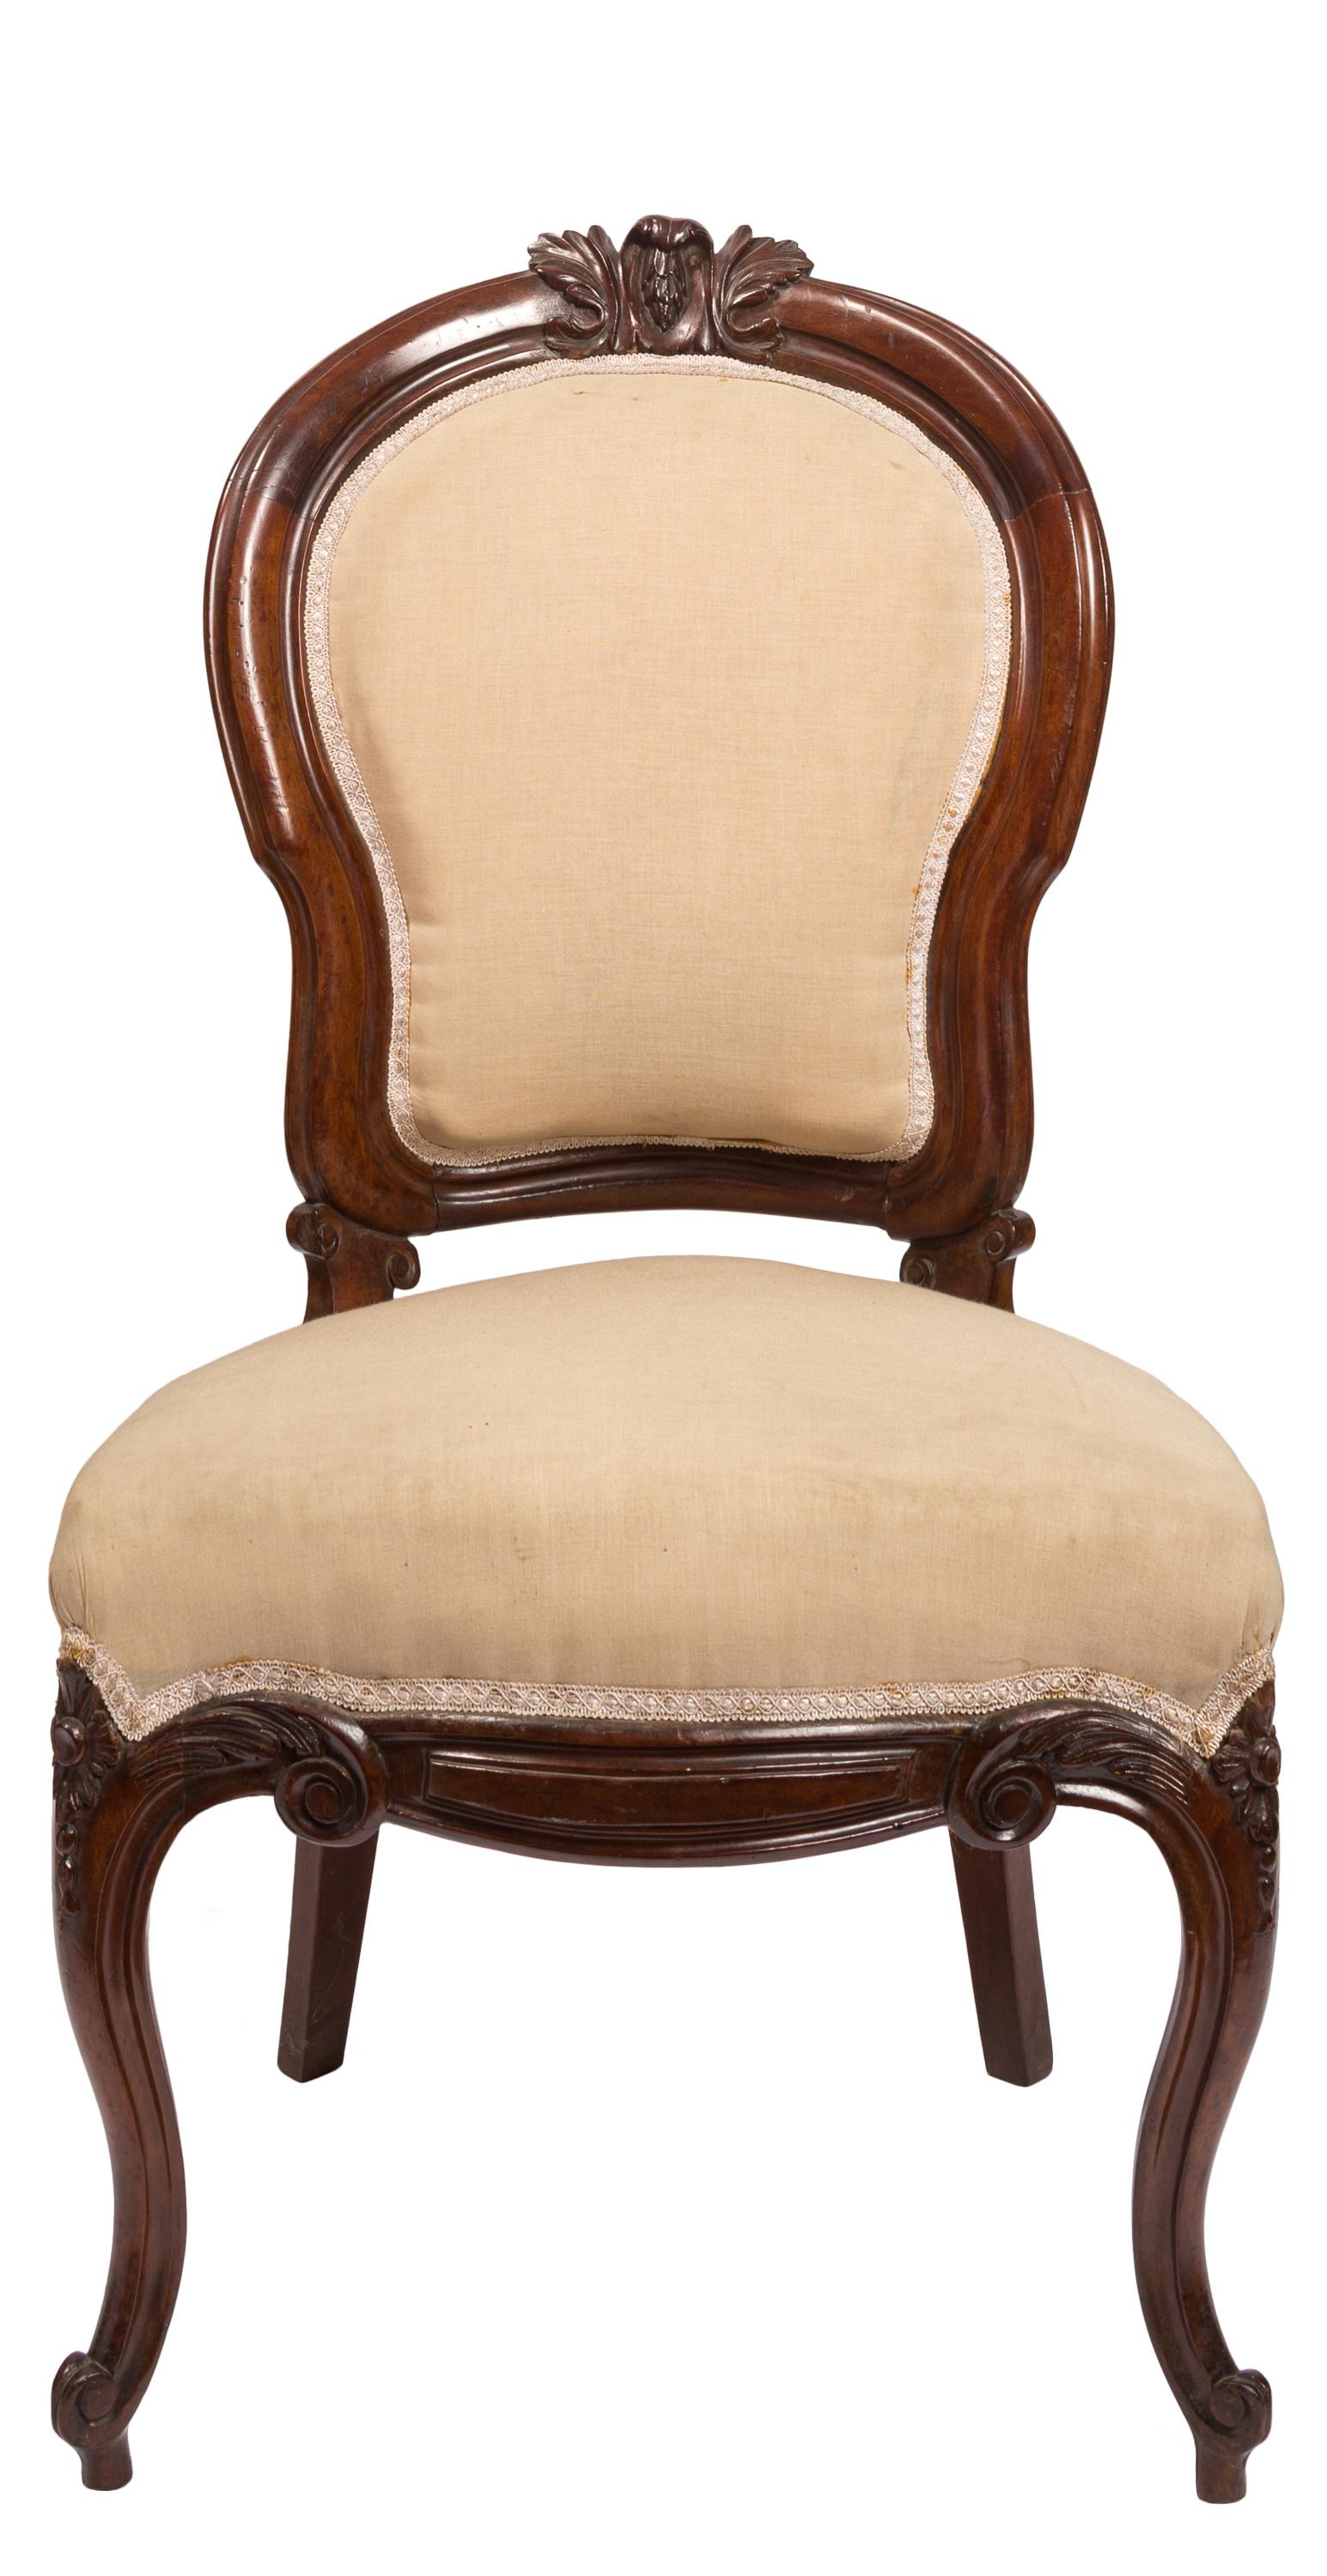 Set of Six Upholstered, Carved Spanish Isabelina / Victorian Period Side Chairs For Sale 7